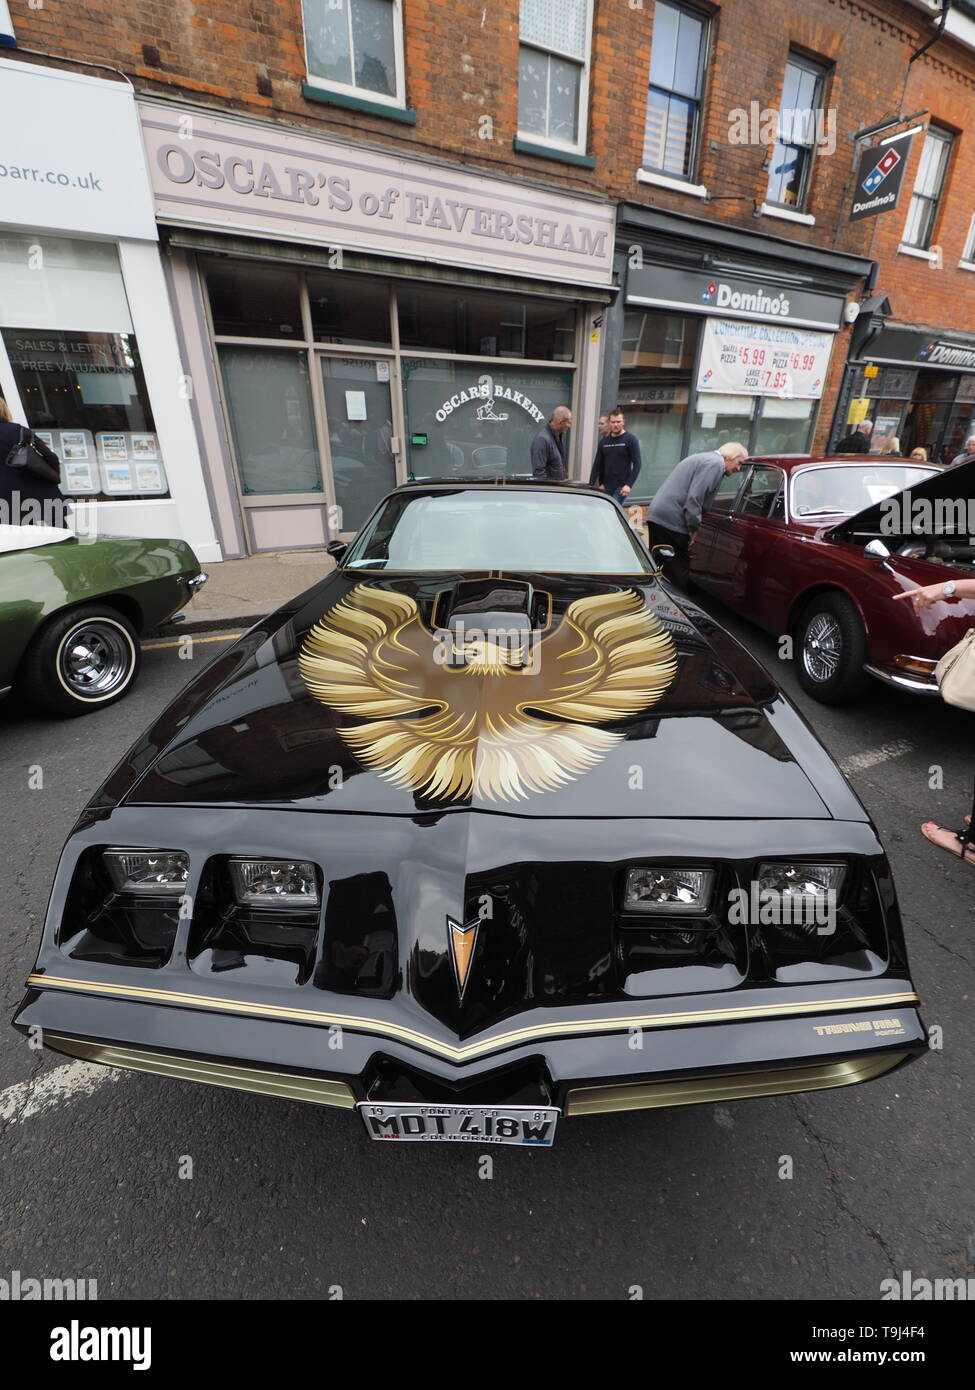 Faversham, Kent, UK. 19th May, 2019. 25th Faversham Transport Weekend: the second day of this annual transport festival now in its 25th year showcasing a wide range of vintage cars and vehicles. Pictured: a 1980 Pontiac Firebird Trans Am. Credit: James Bell/Alamy Live News Stock Photo